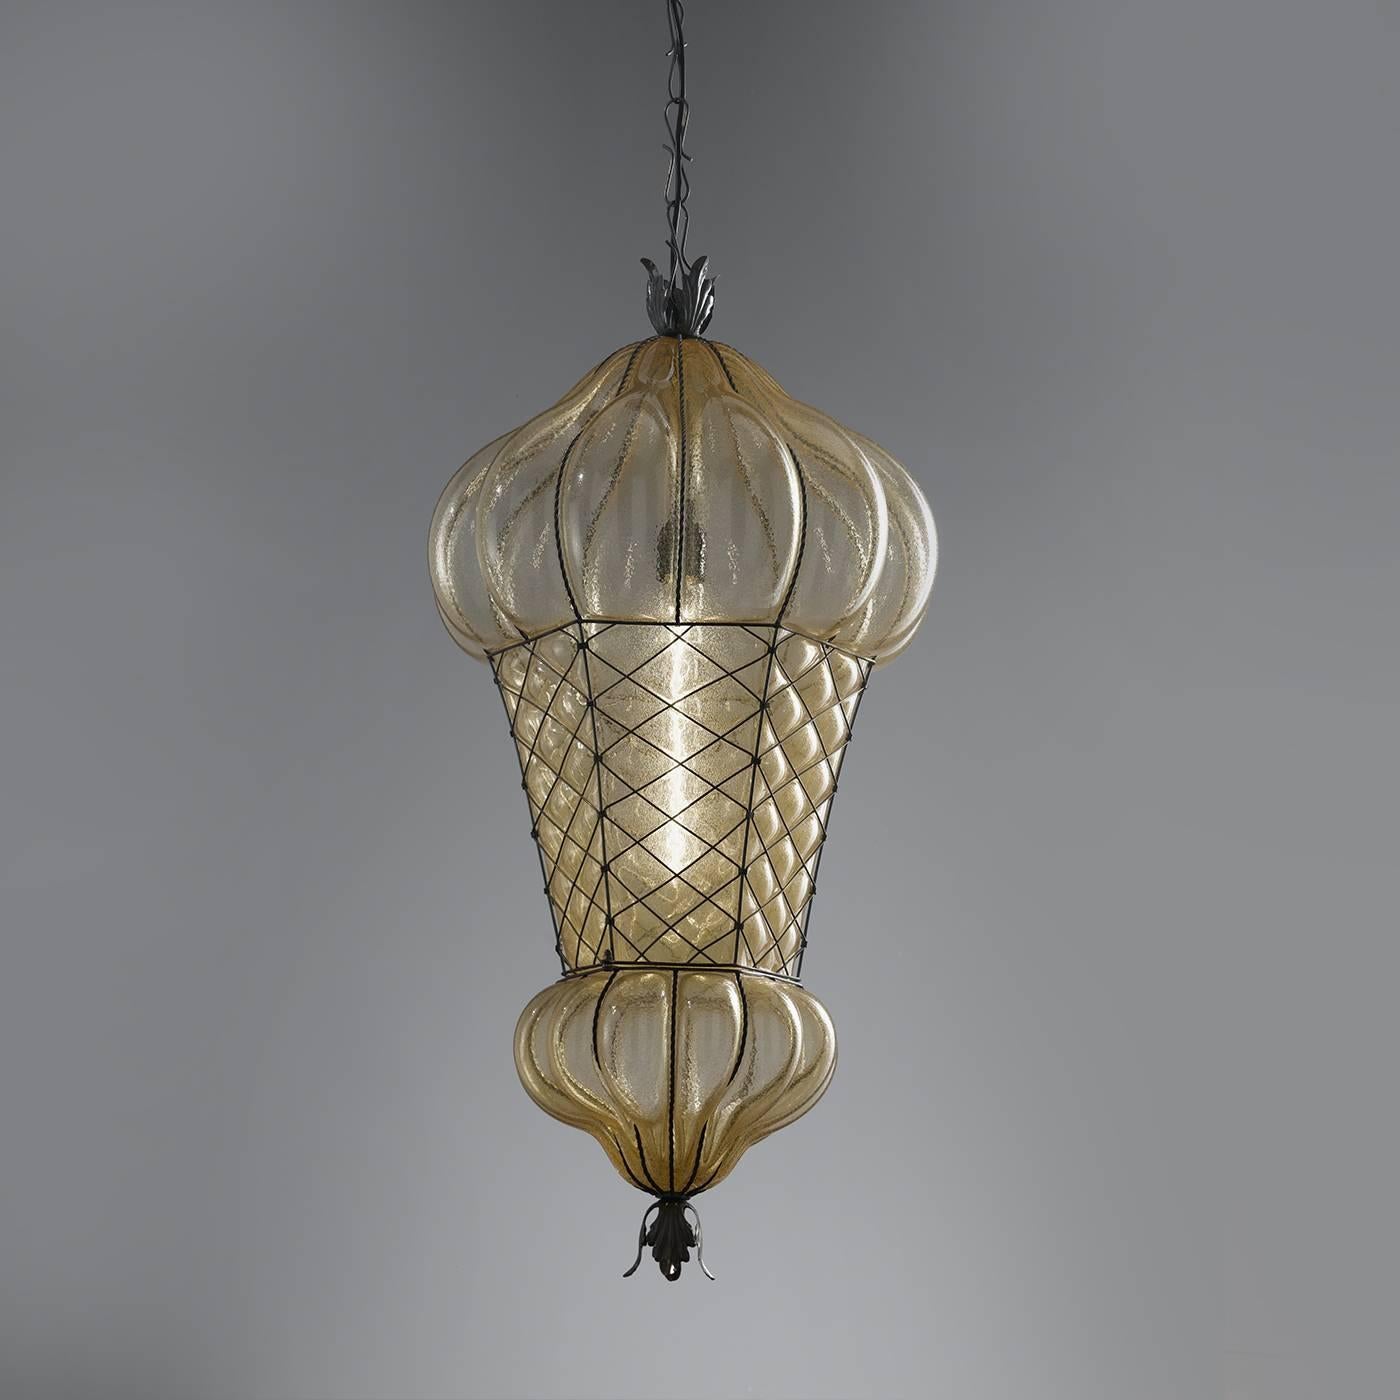 This magnificent lamp will add a touch of opulence to a living room, thanks to the amber color of its Murano glass shade and the sinuous shapes of the bronzed steel structure. The glass is mouth-blown into the structure that encapsulates it,